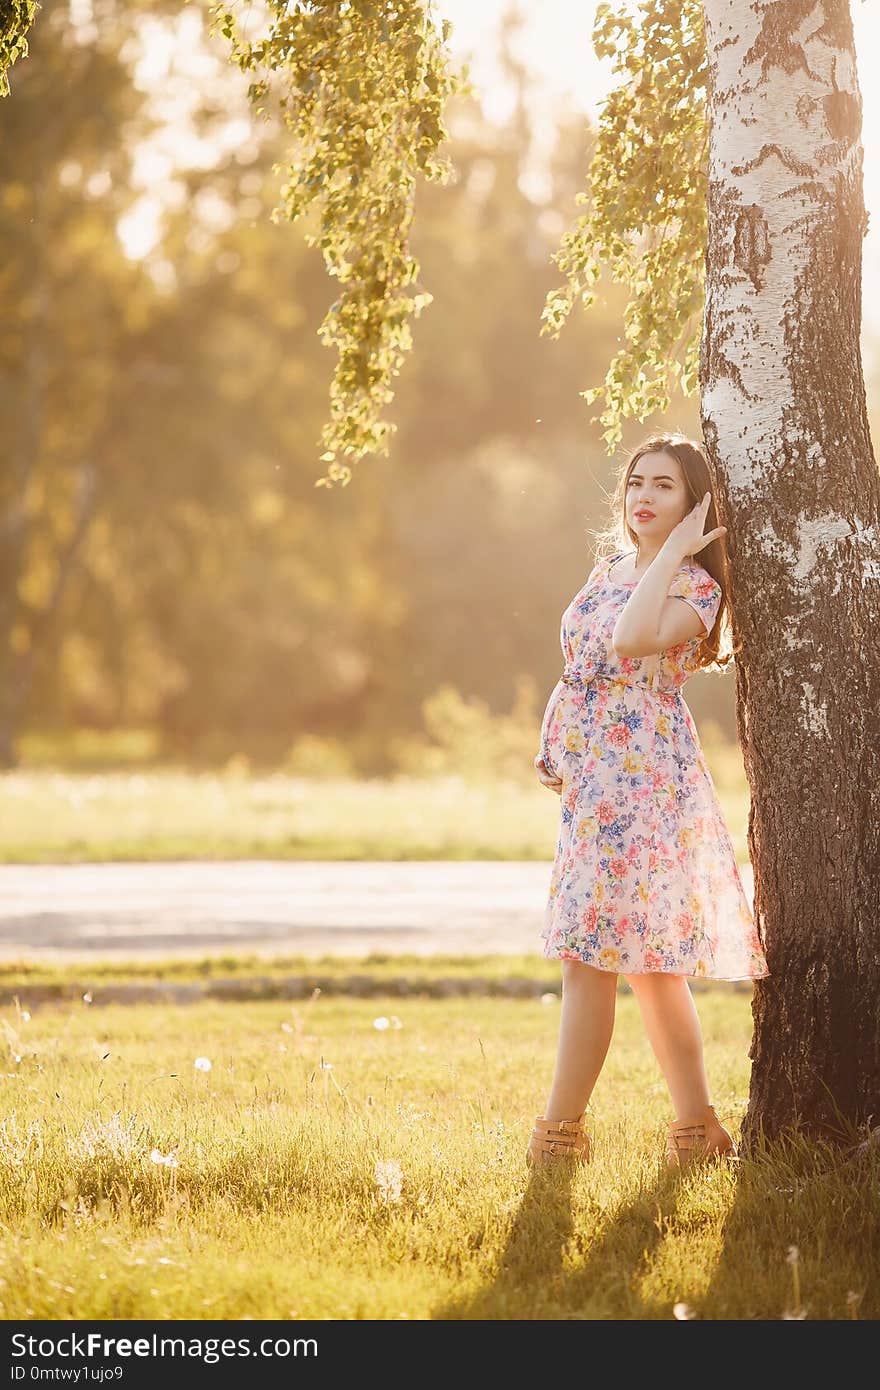 Pregnant girl in a light dress is walking around the park leaning against a tree. Concept maternity, pregnancy, childbirth, a healthy walk in the park, nature help. Sunset